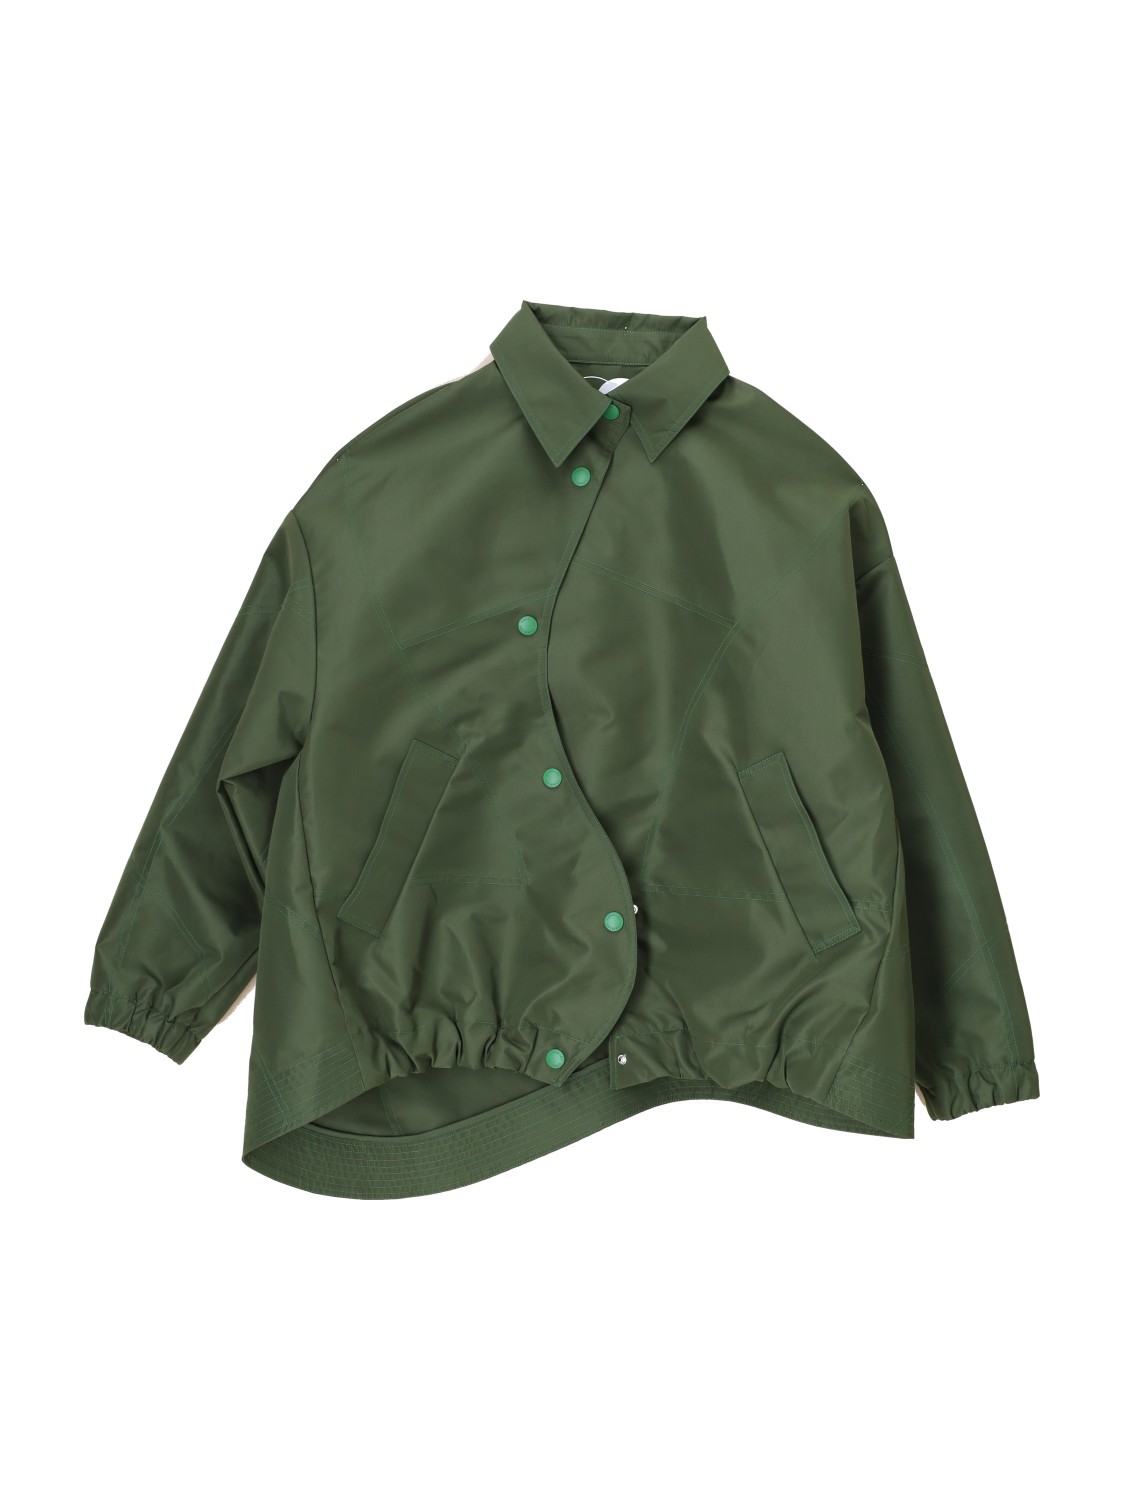 Chester - Windbreaker jacket with asymmetric button placket  